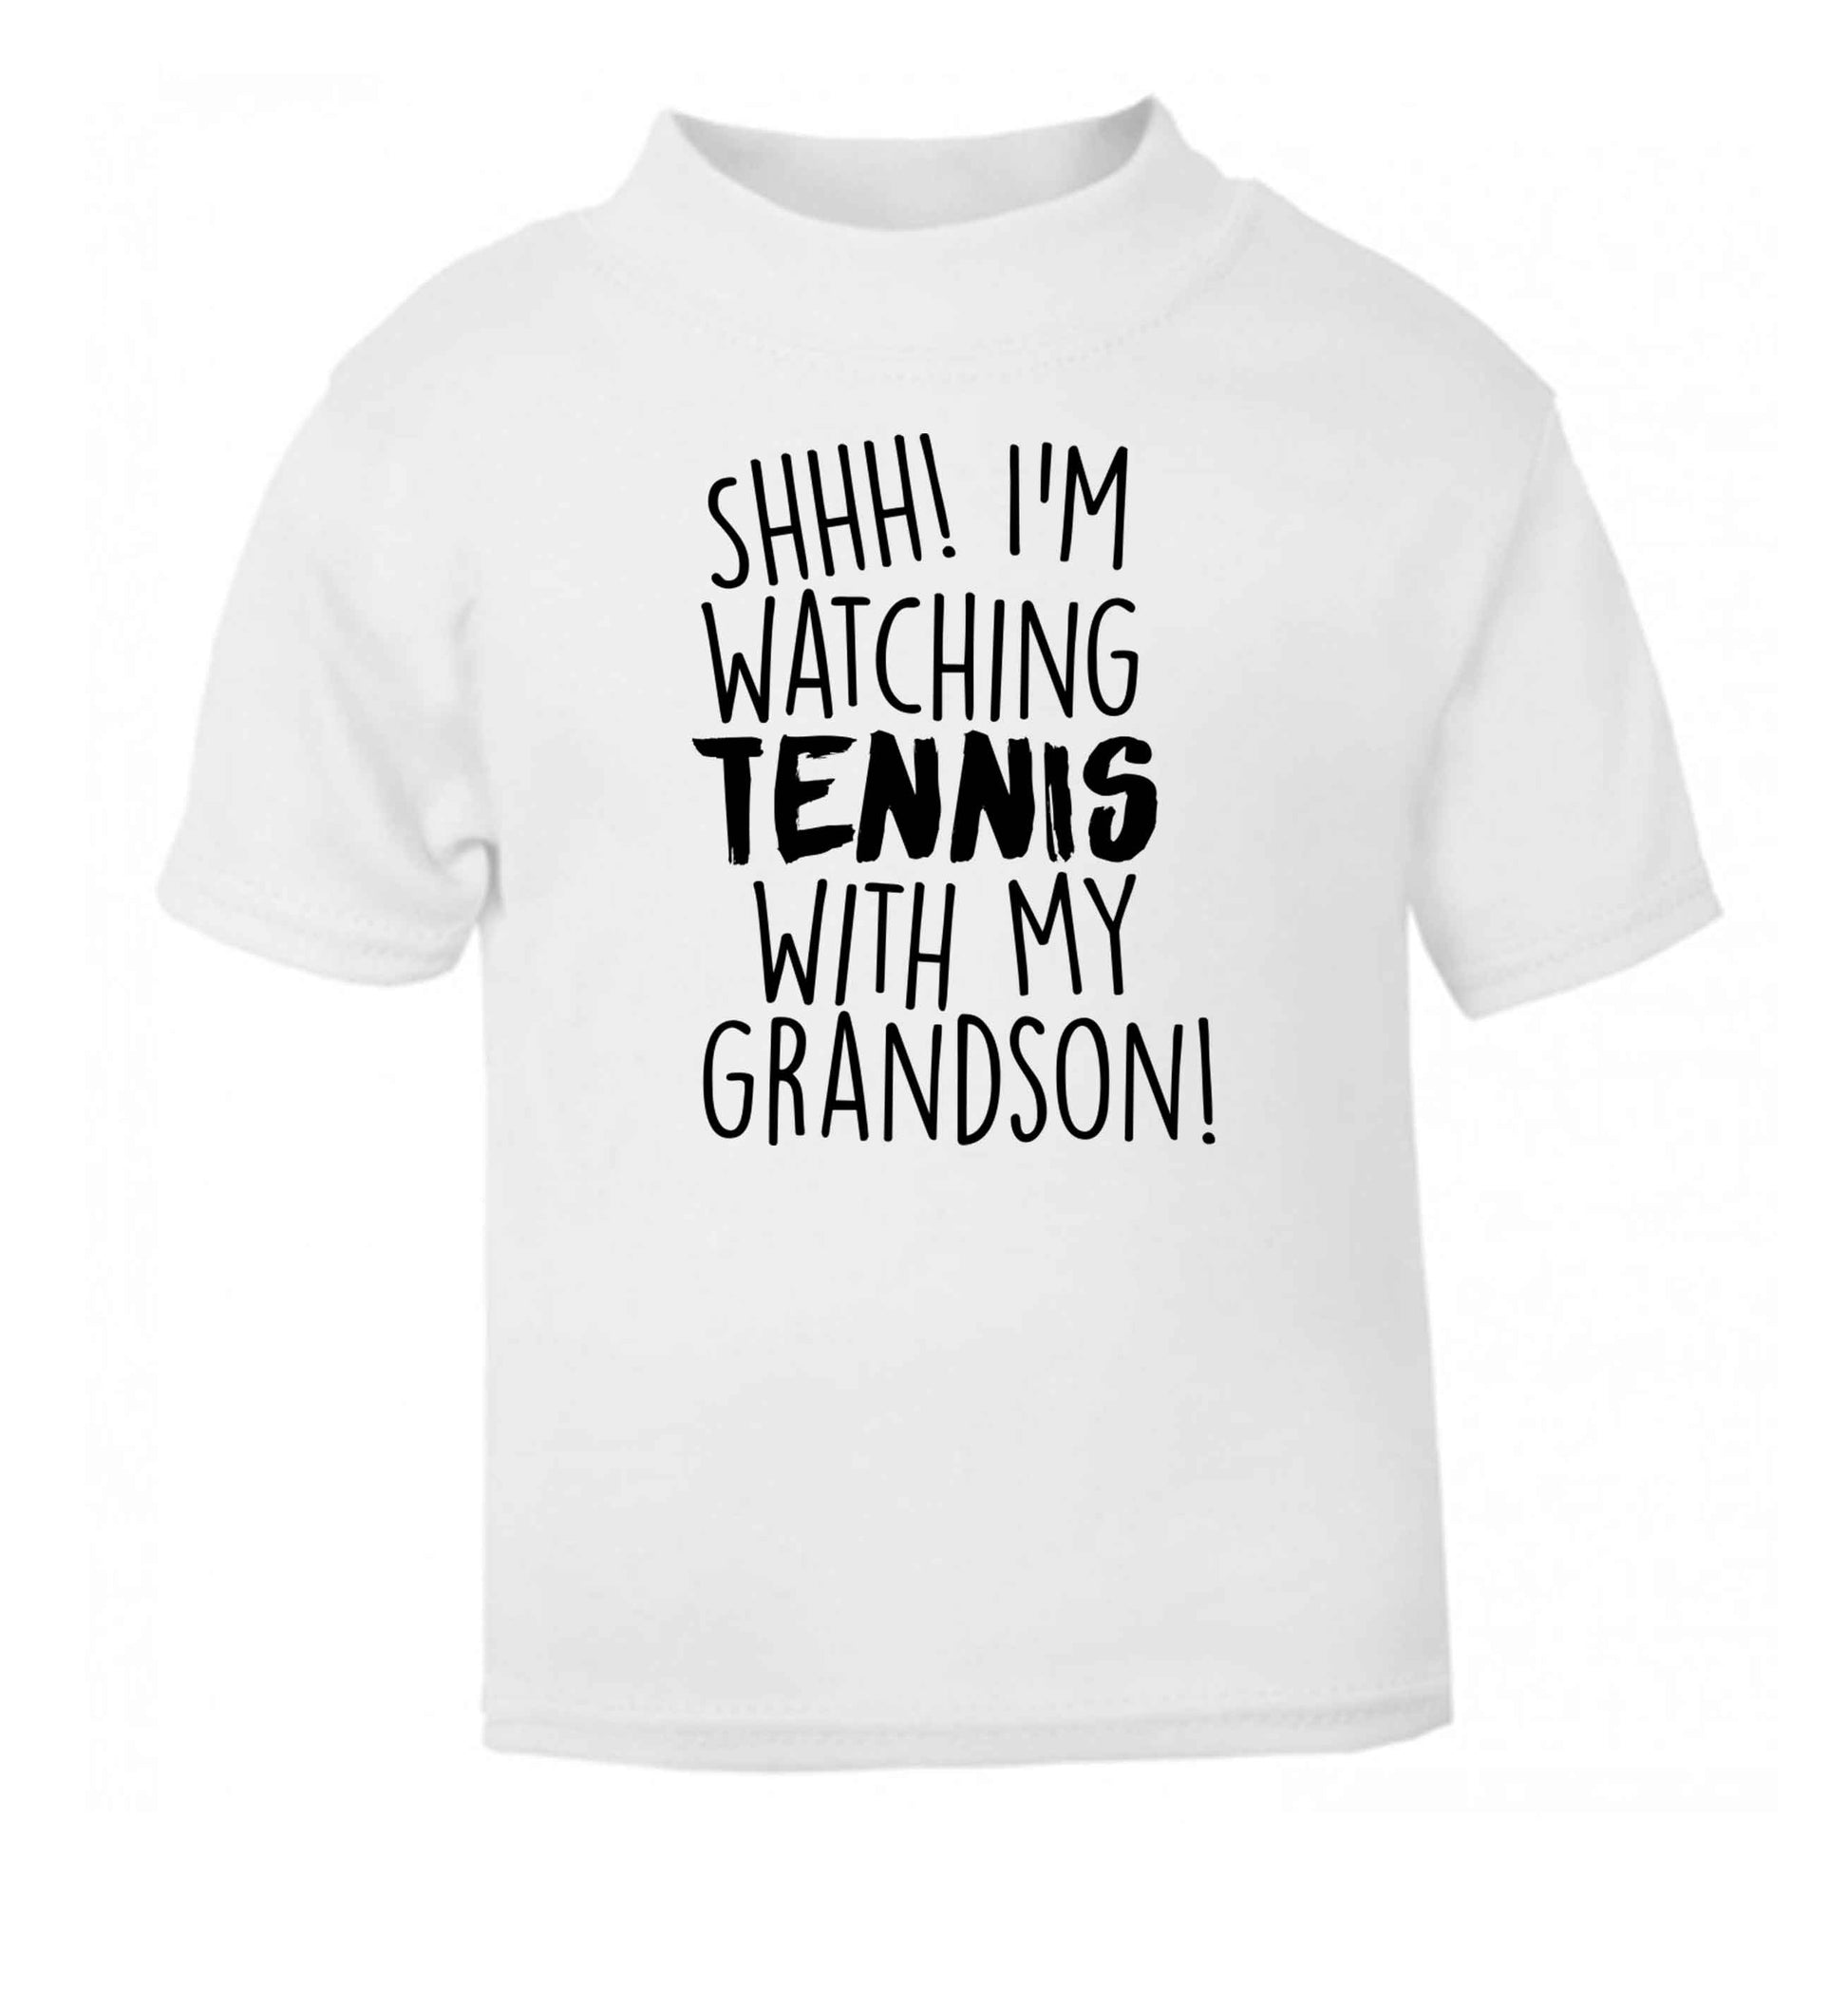 Shh! I'm watching tennis with my grandson! white Baby Toddler Tshirt 2 Years